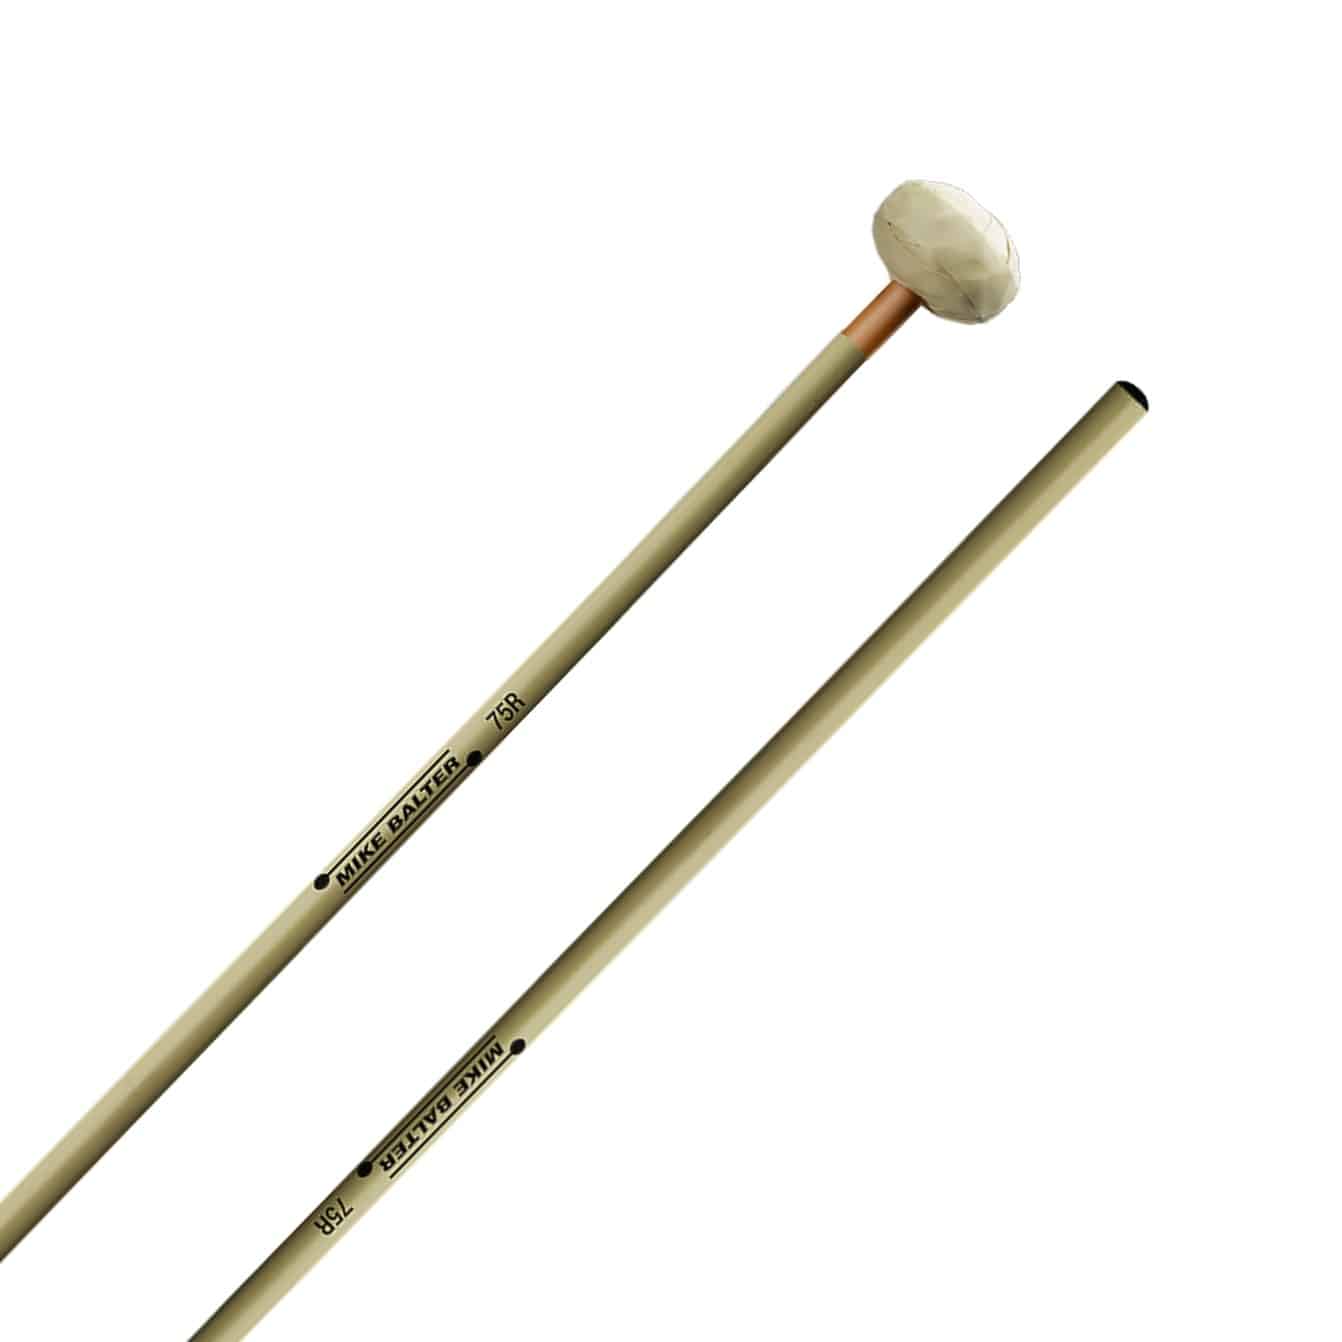 Balter 75 Tradition Plus Soft Marimba Mallets - DISCONTINUED - last few pairs!